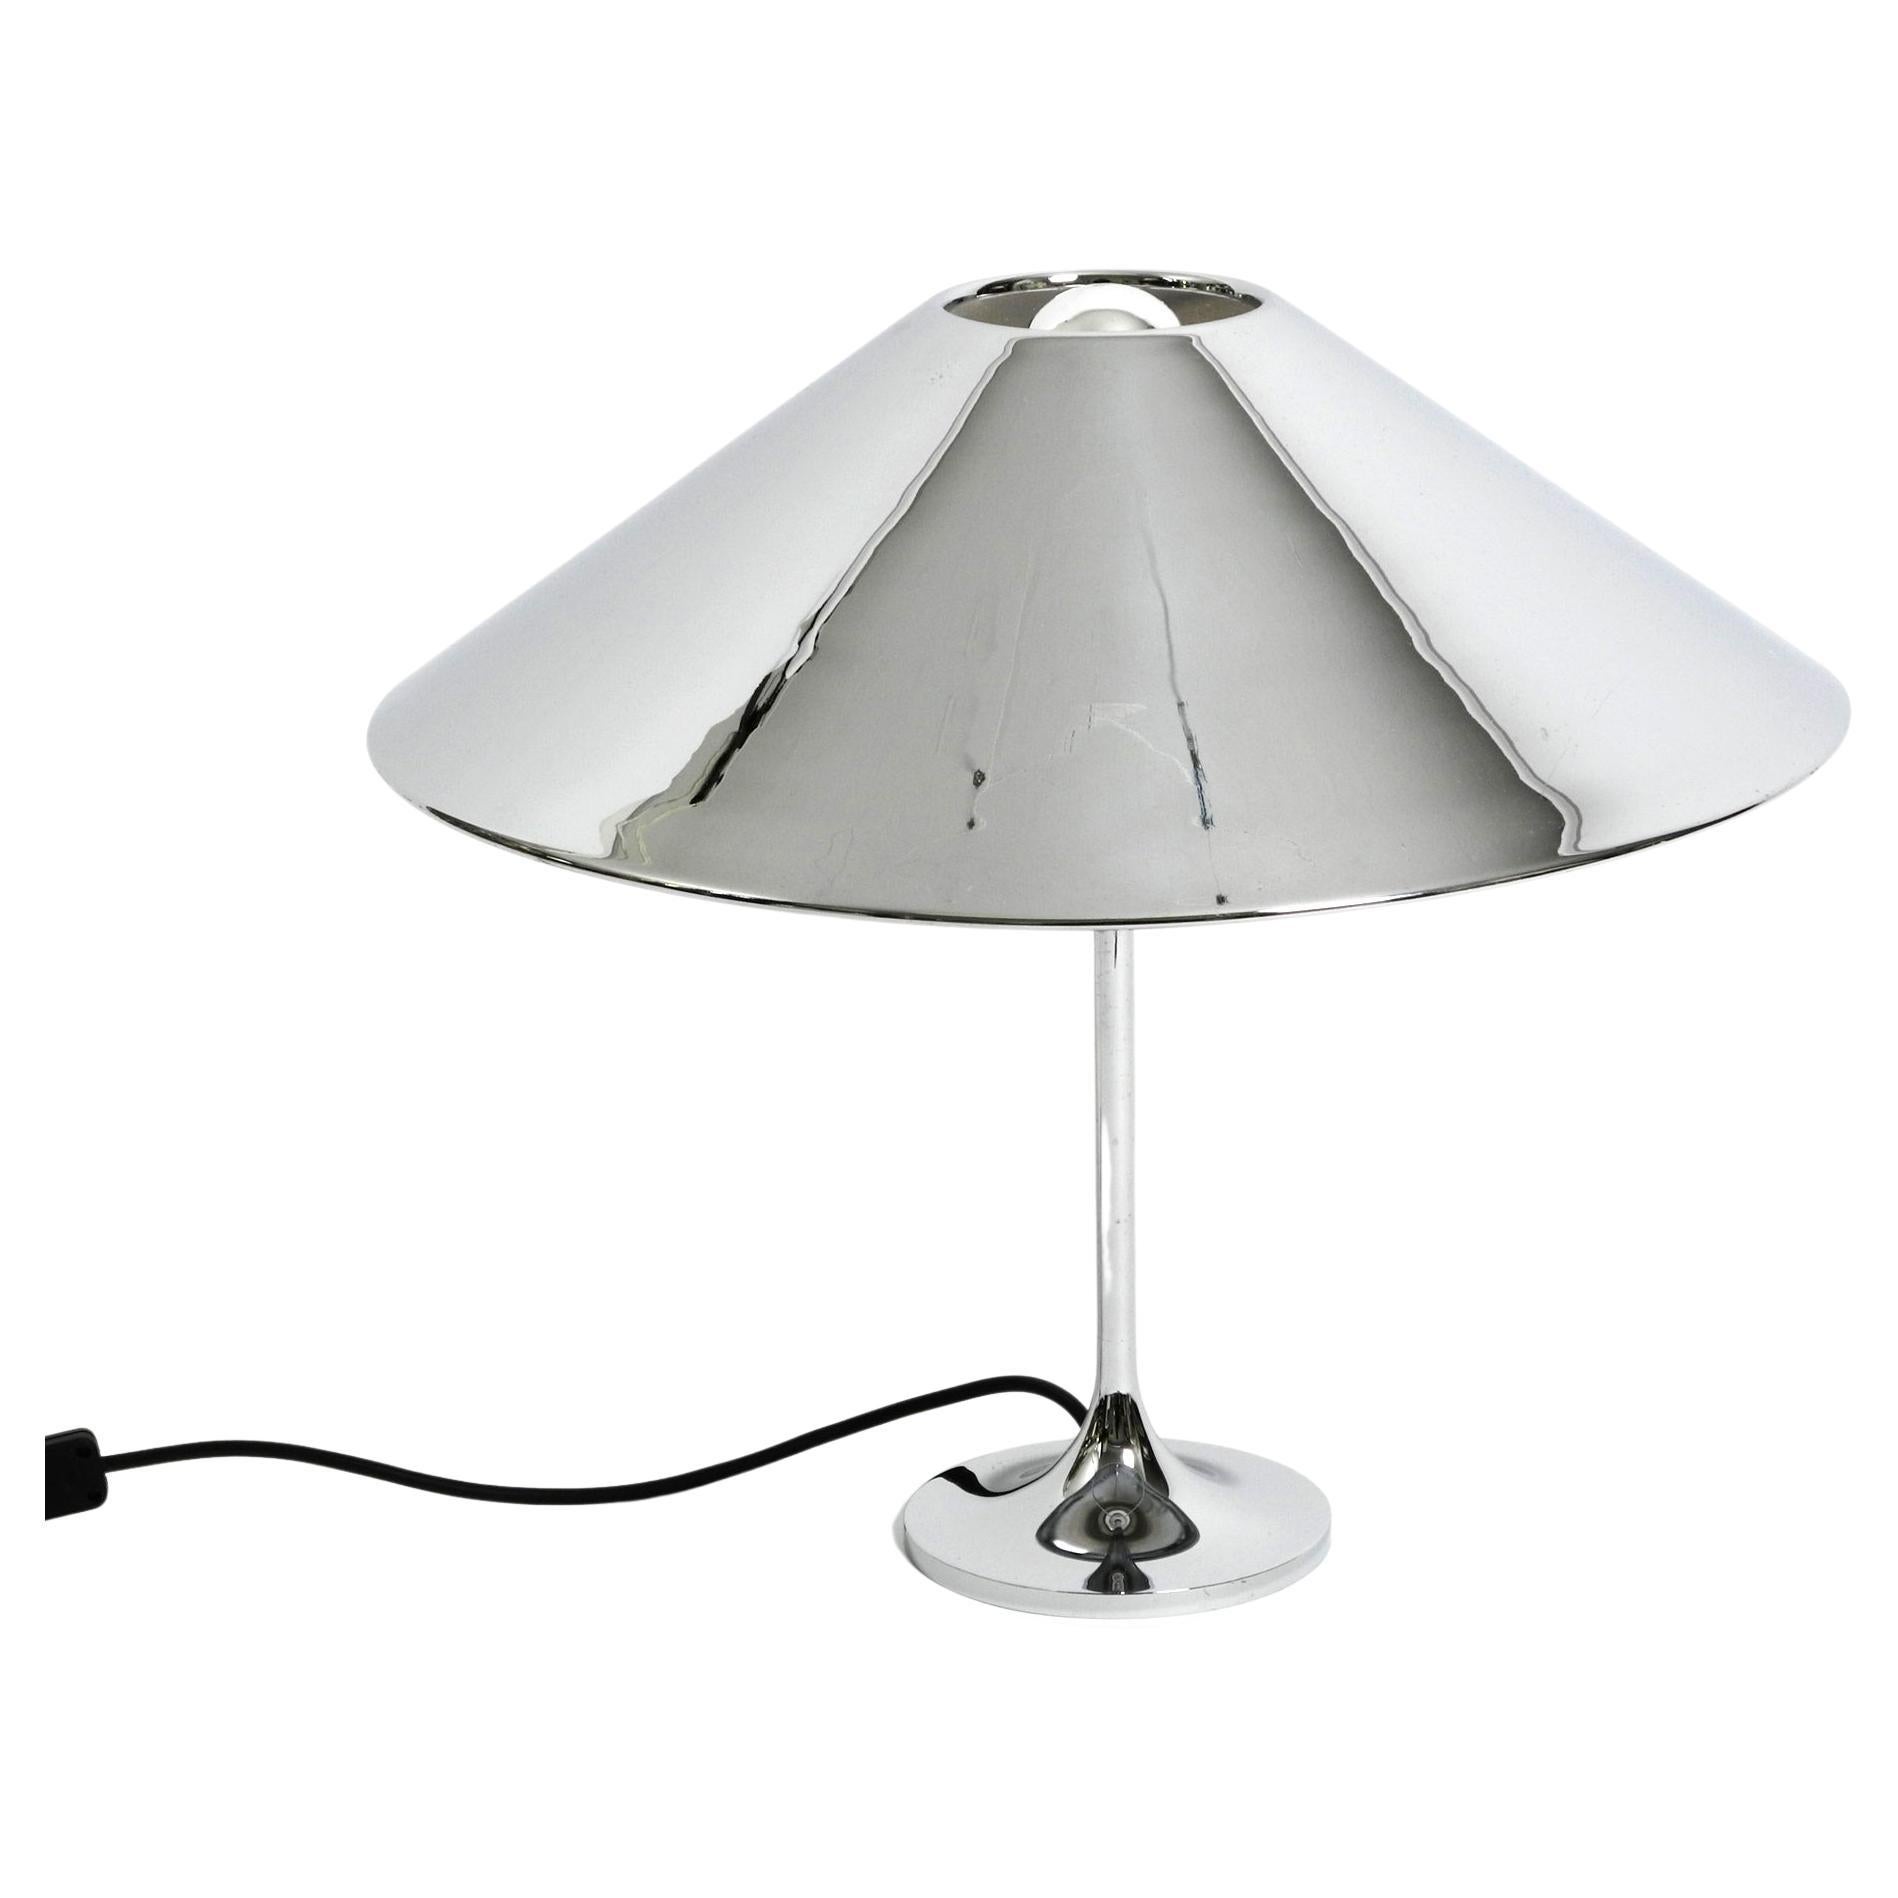 Large, Heavy 70s Metal Chrome Table Lamp with a Metal Shade in a Classic  Design For Sale at 1stDibs | chrome lamp shade, metal shade table lamp, table  lamp metal shade